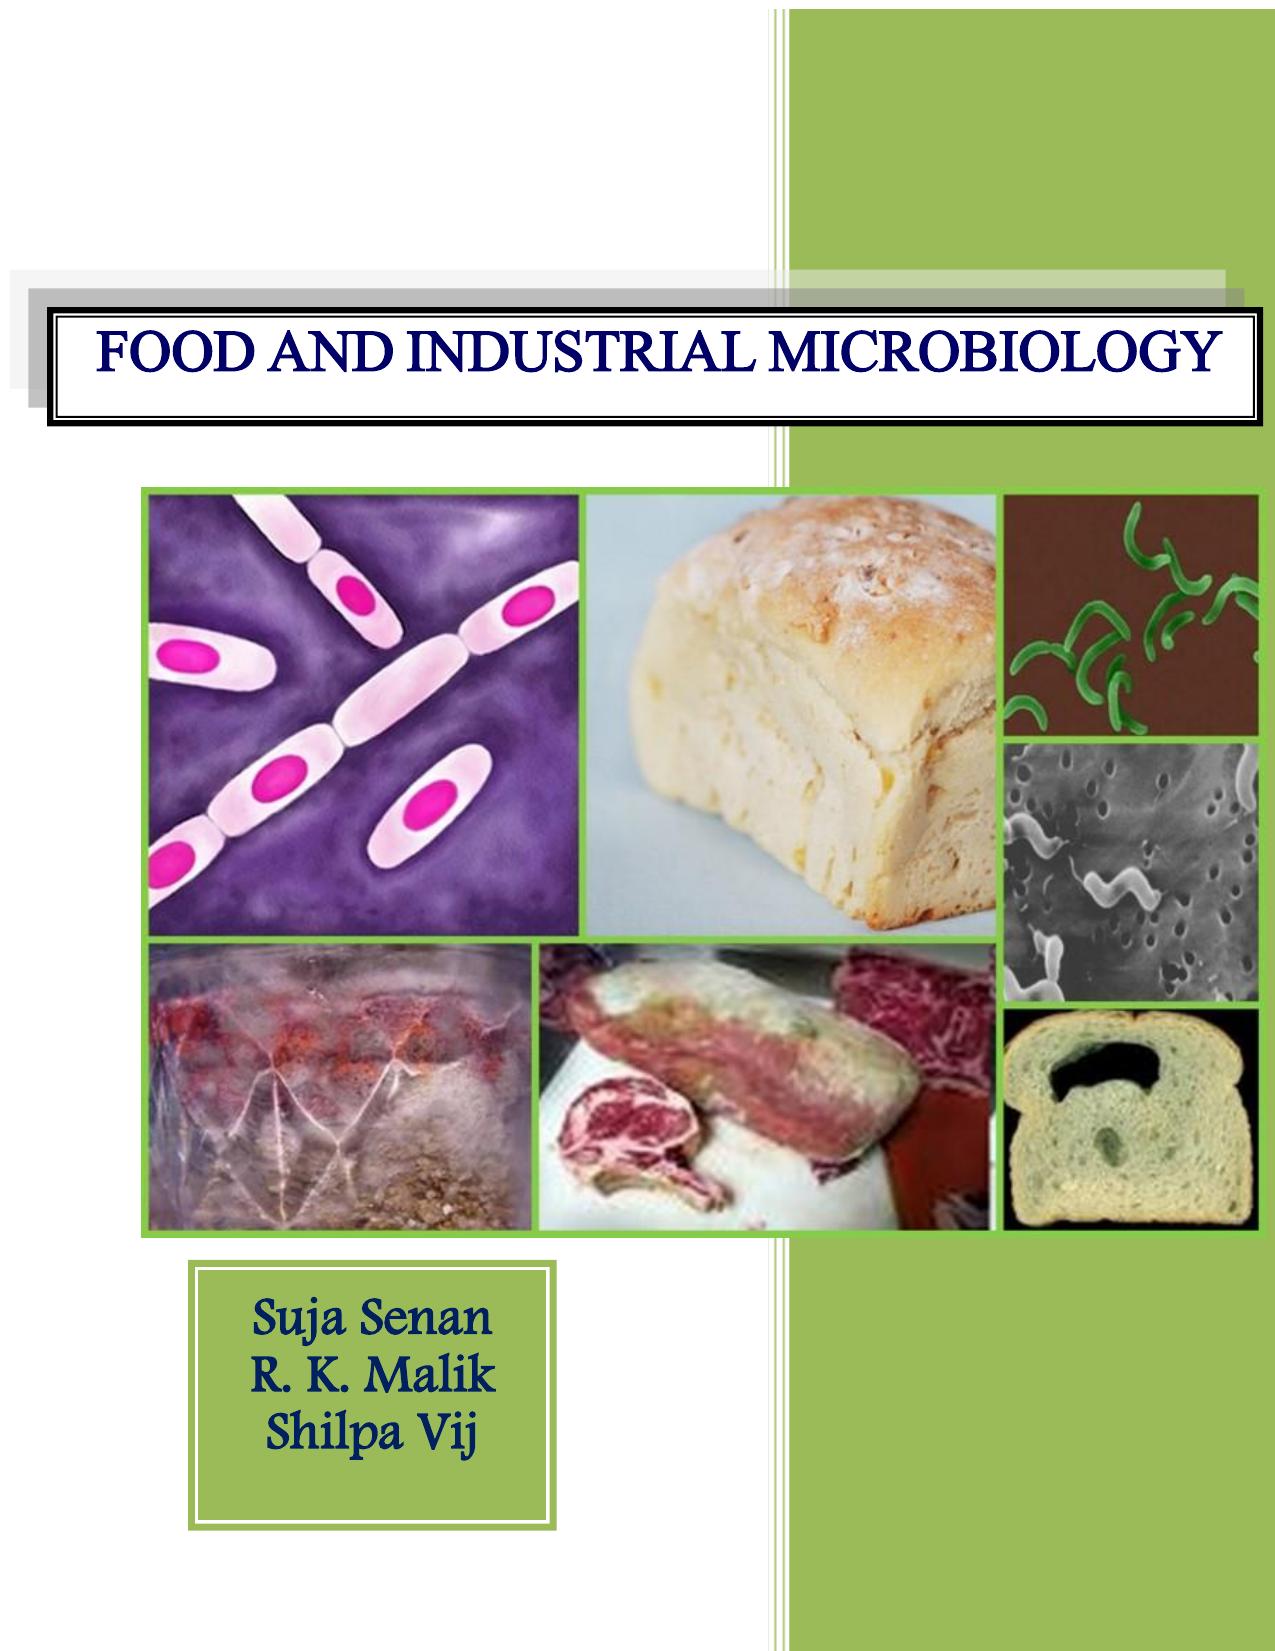 FOOD AND INDUSTRIAL MICROBIOLOGY 2017